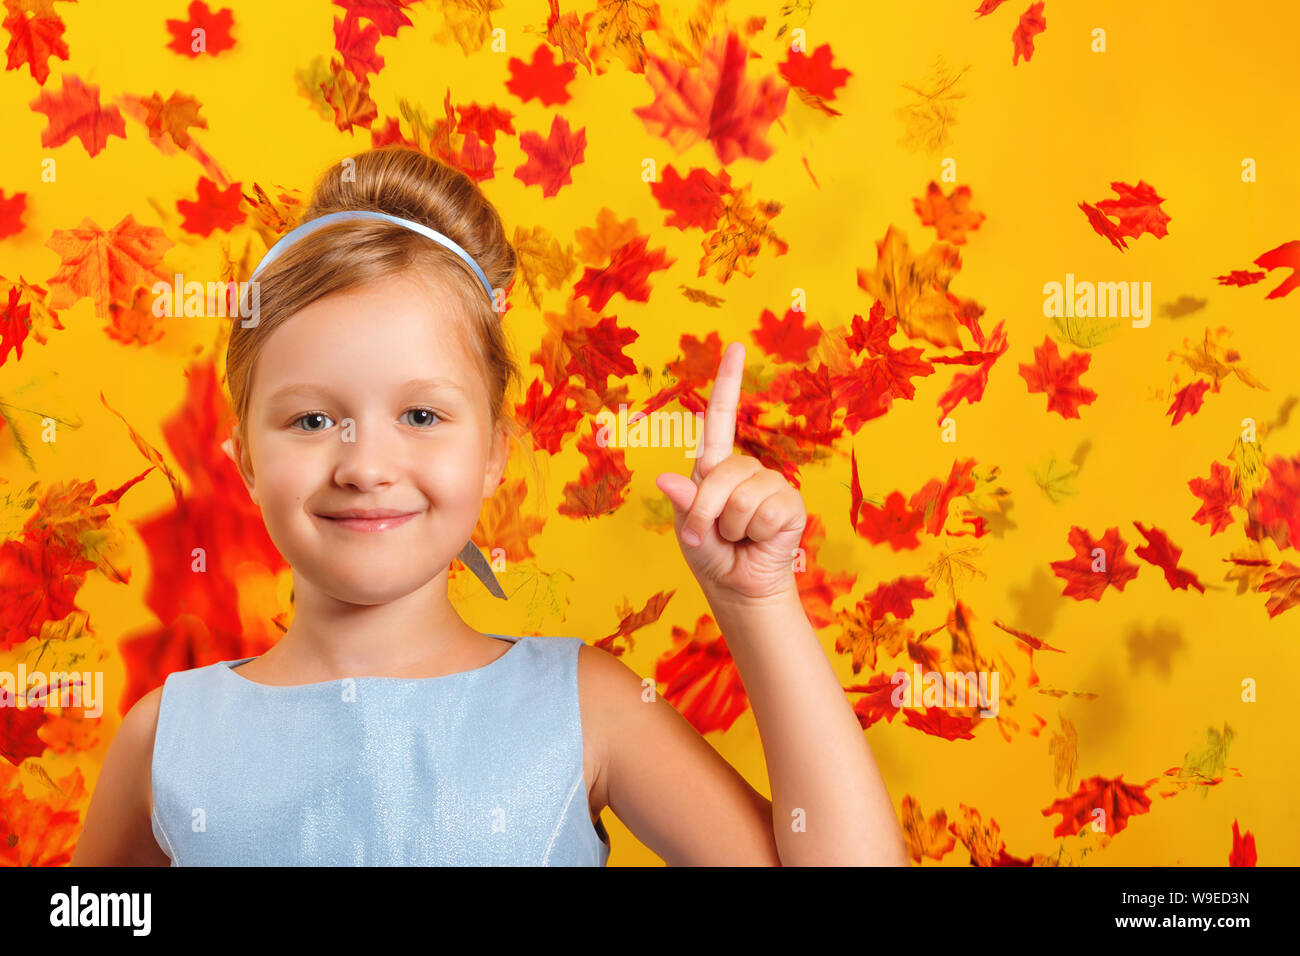 Little girl in a Cinderella princess costume with falling autumn leaves. The child shows the index finger up. Concept for autumn, holiday, halloween, Stock Photo